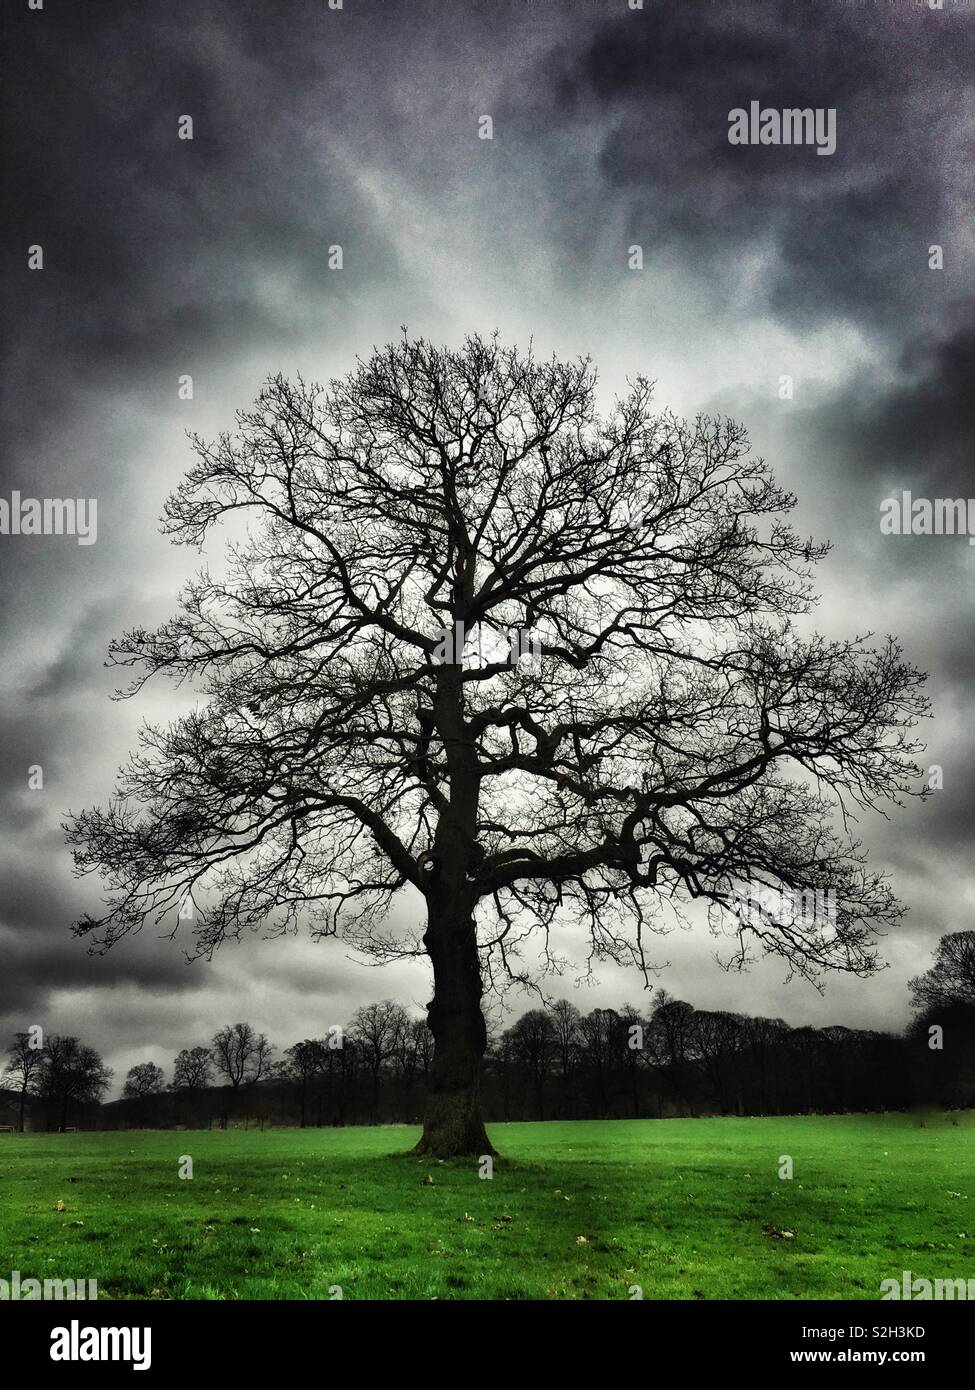 Bare tree in winter against dramatic cloudy sky Stock Photo